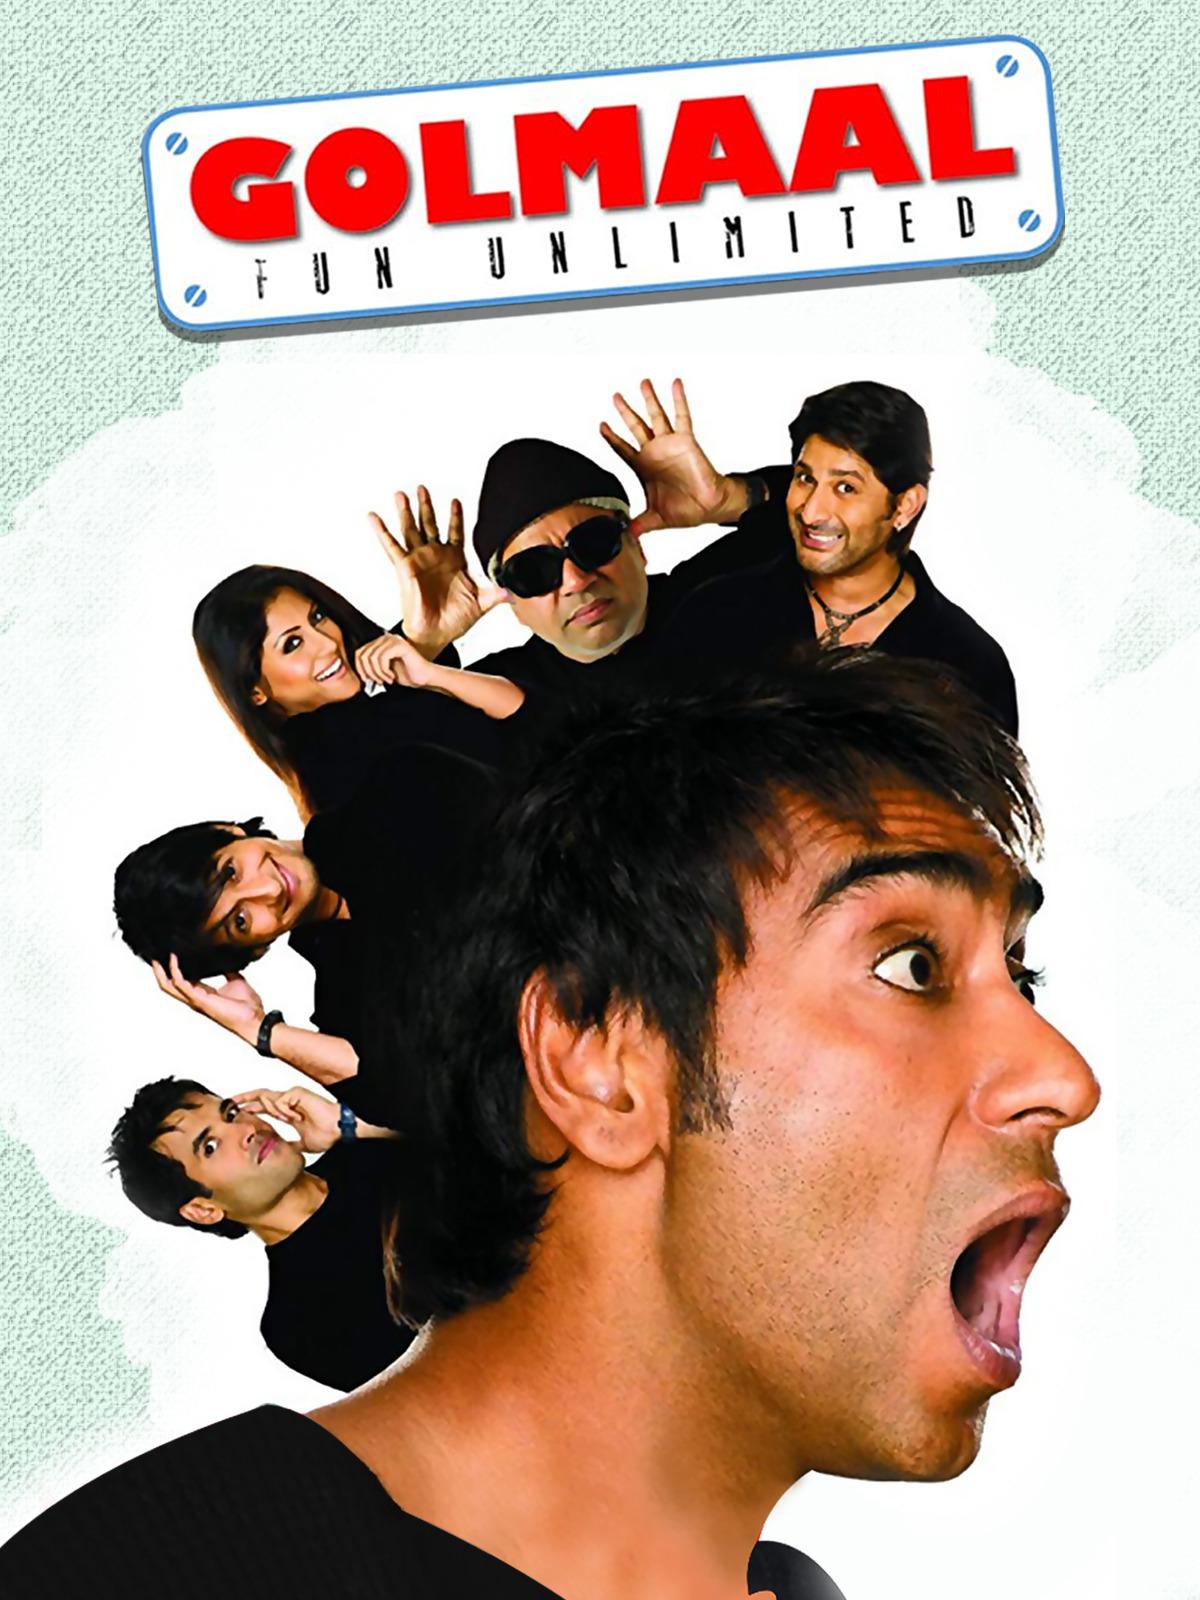 Golmaal: A series of side-splitting comedies that focus on a group of friends and their misadventures, often involving mistaken identities, pranks, and humorous misunderstandings. 